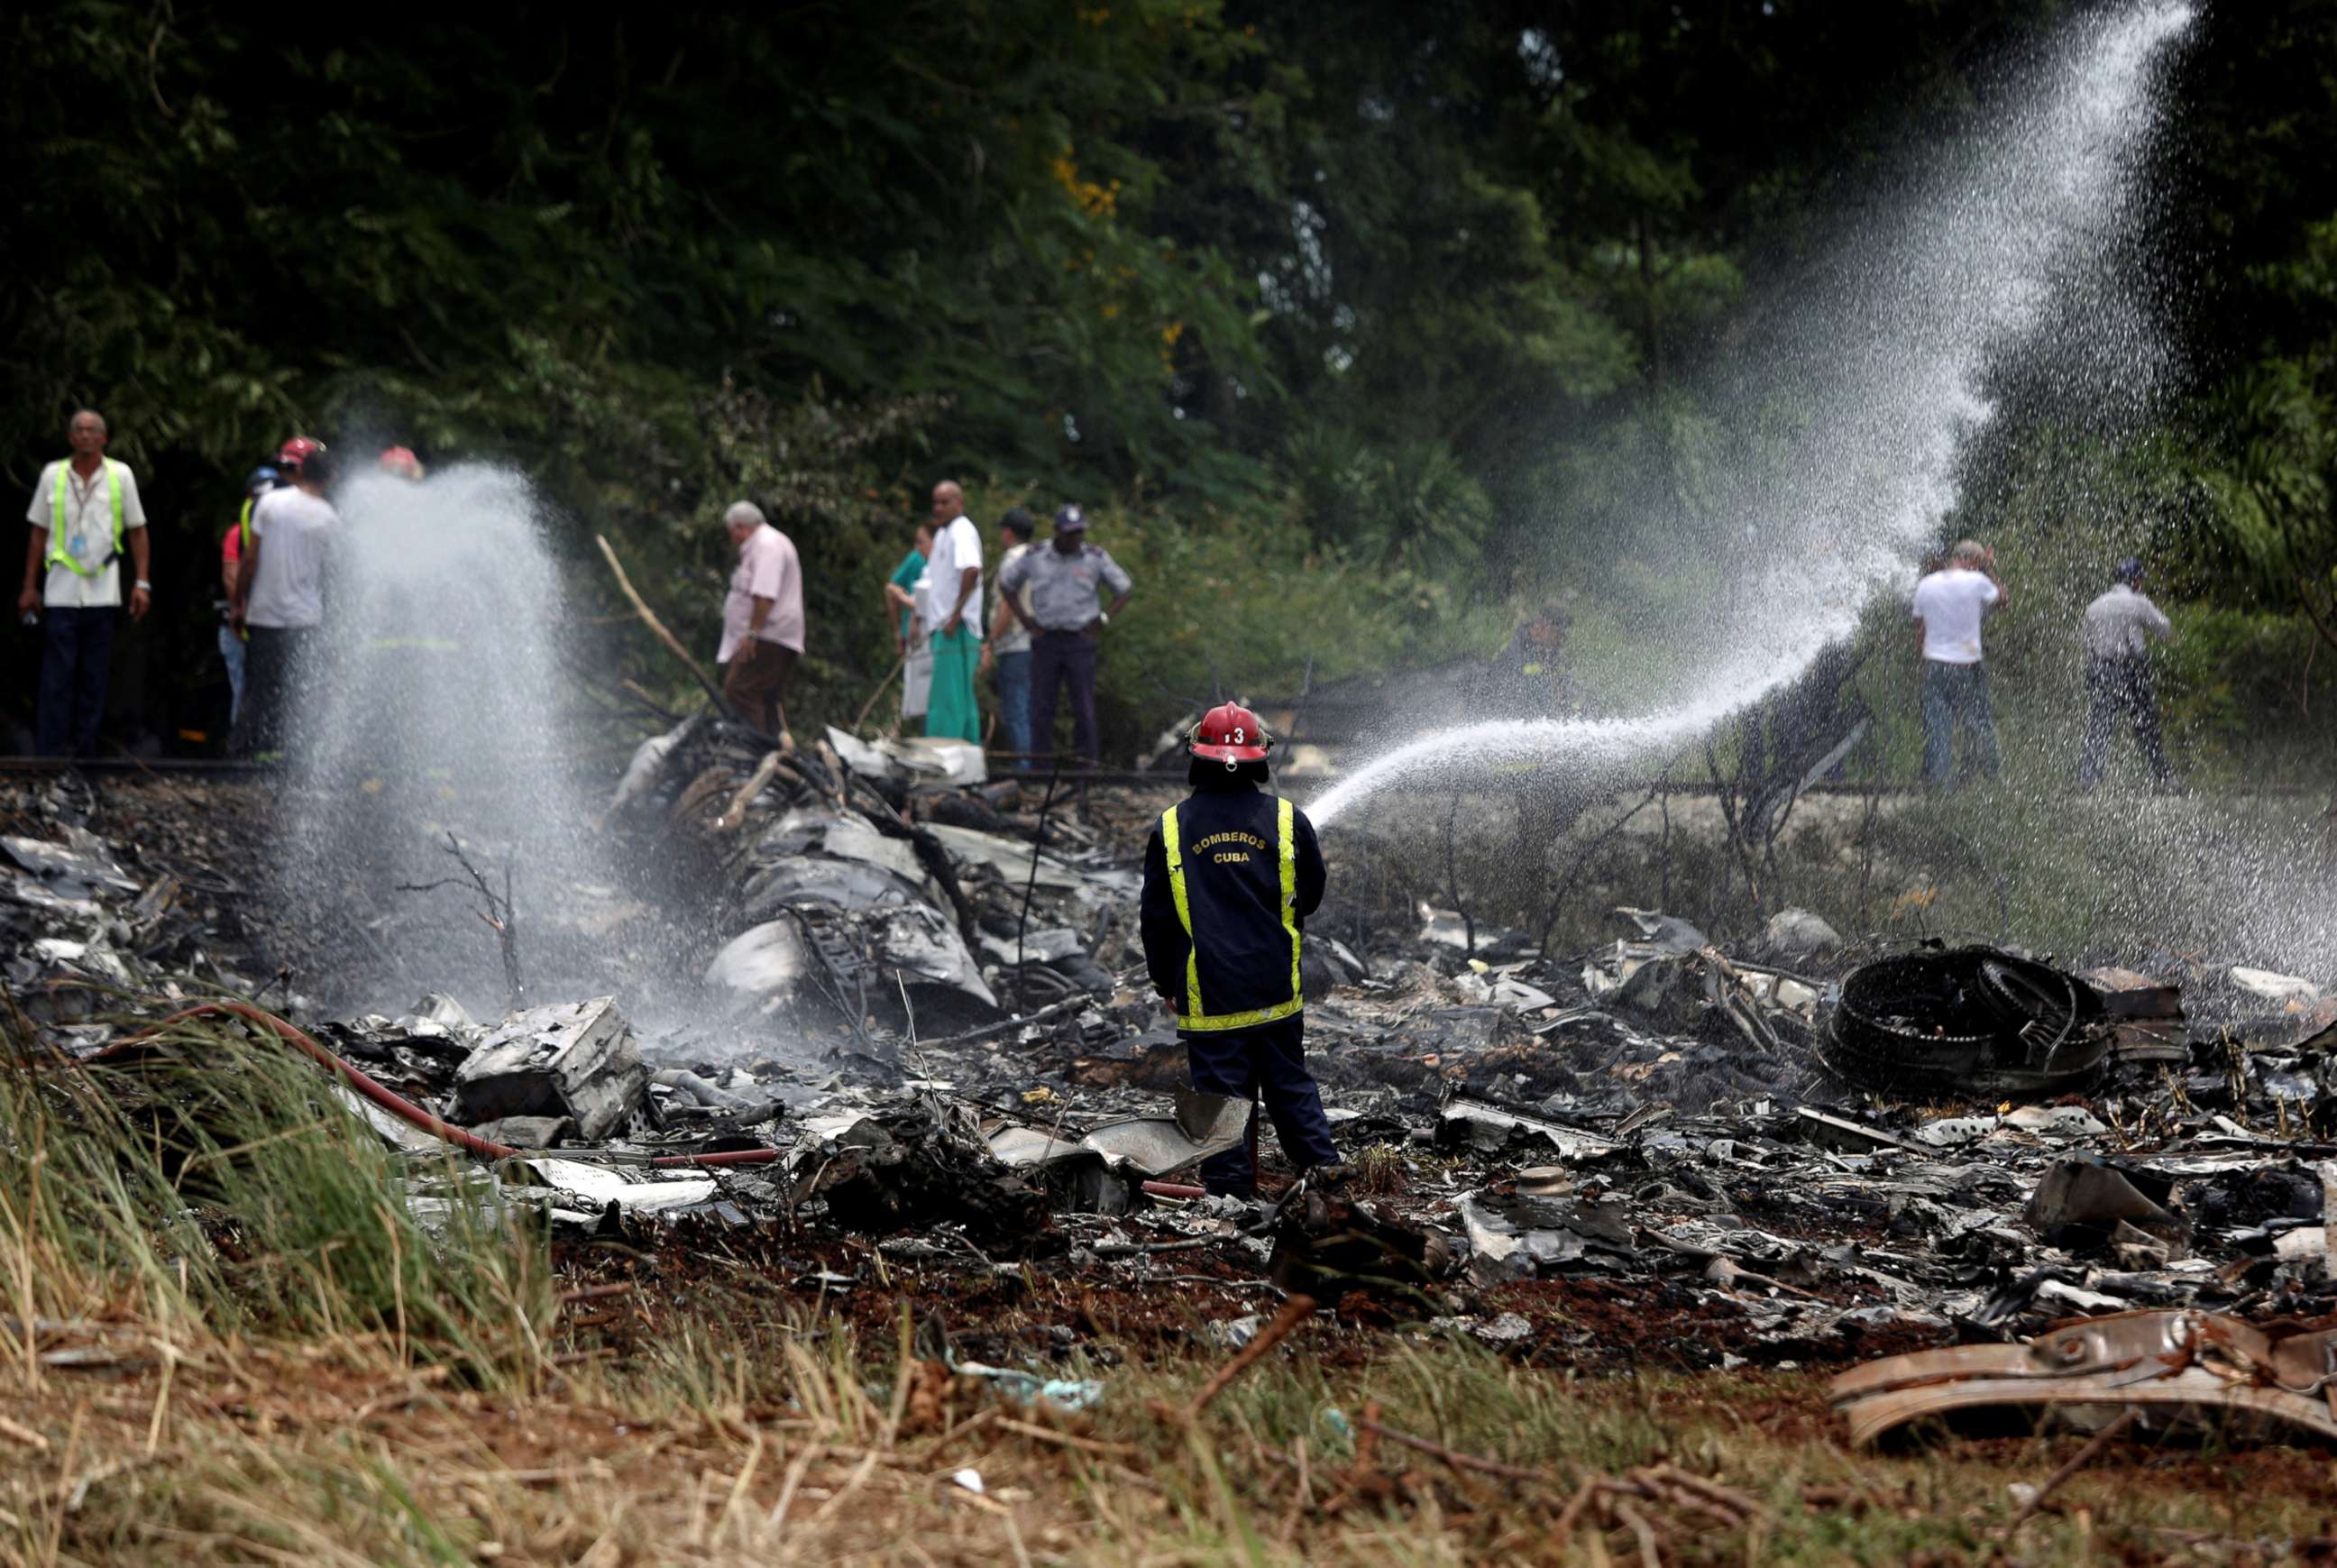 PHOTO: A firefighter works in the wreckage of a Boeing 737 plane that crashed in the agricultural area of Boyeros, around 20 km (12 miles) south of Havana, shortly after taking off from Havana's main airport in Cuba, May 18, 2018.